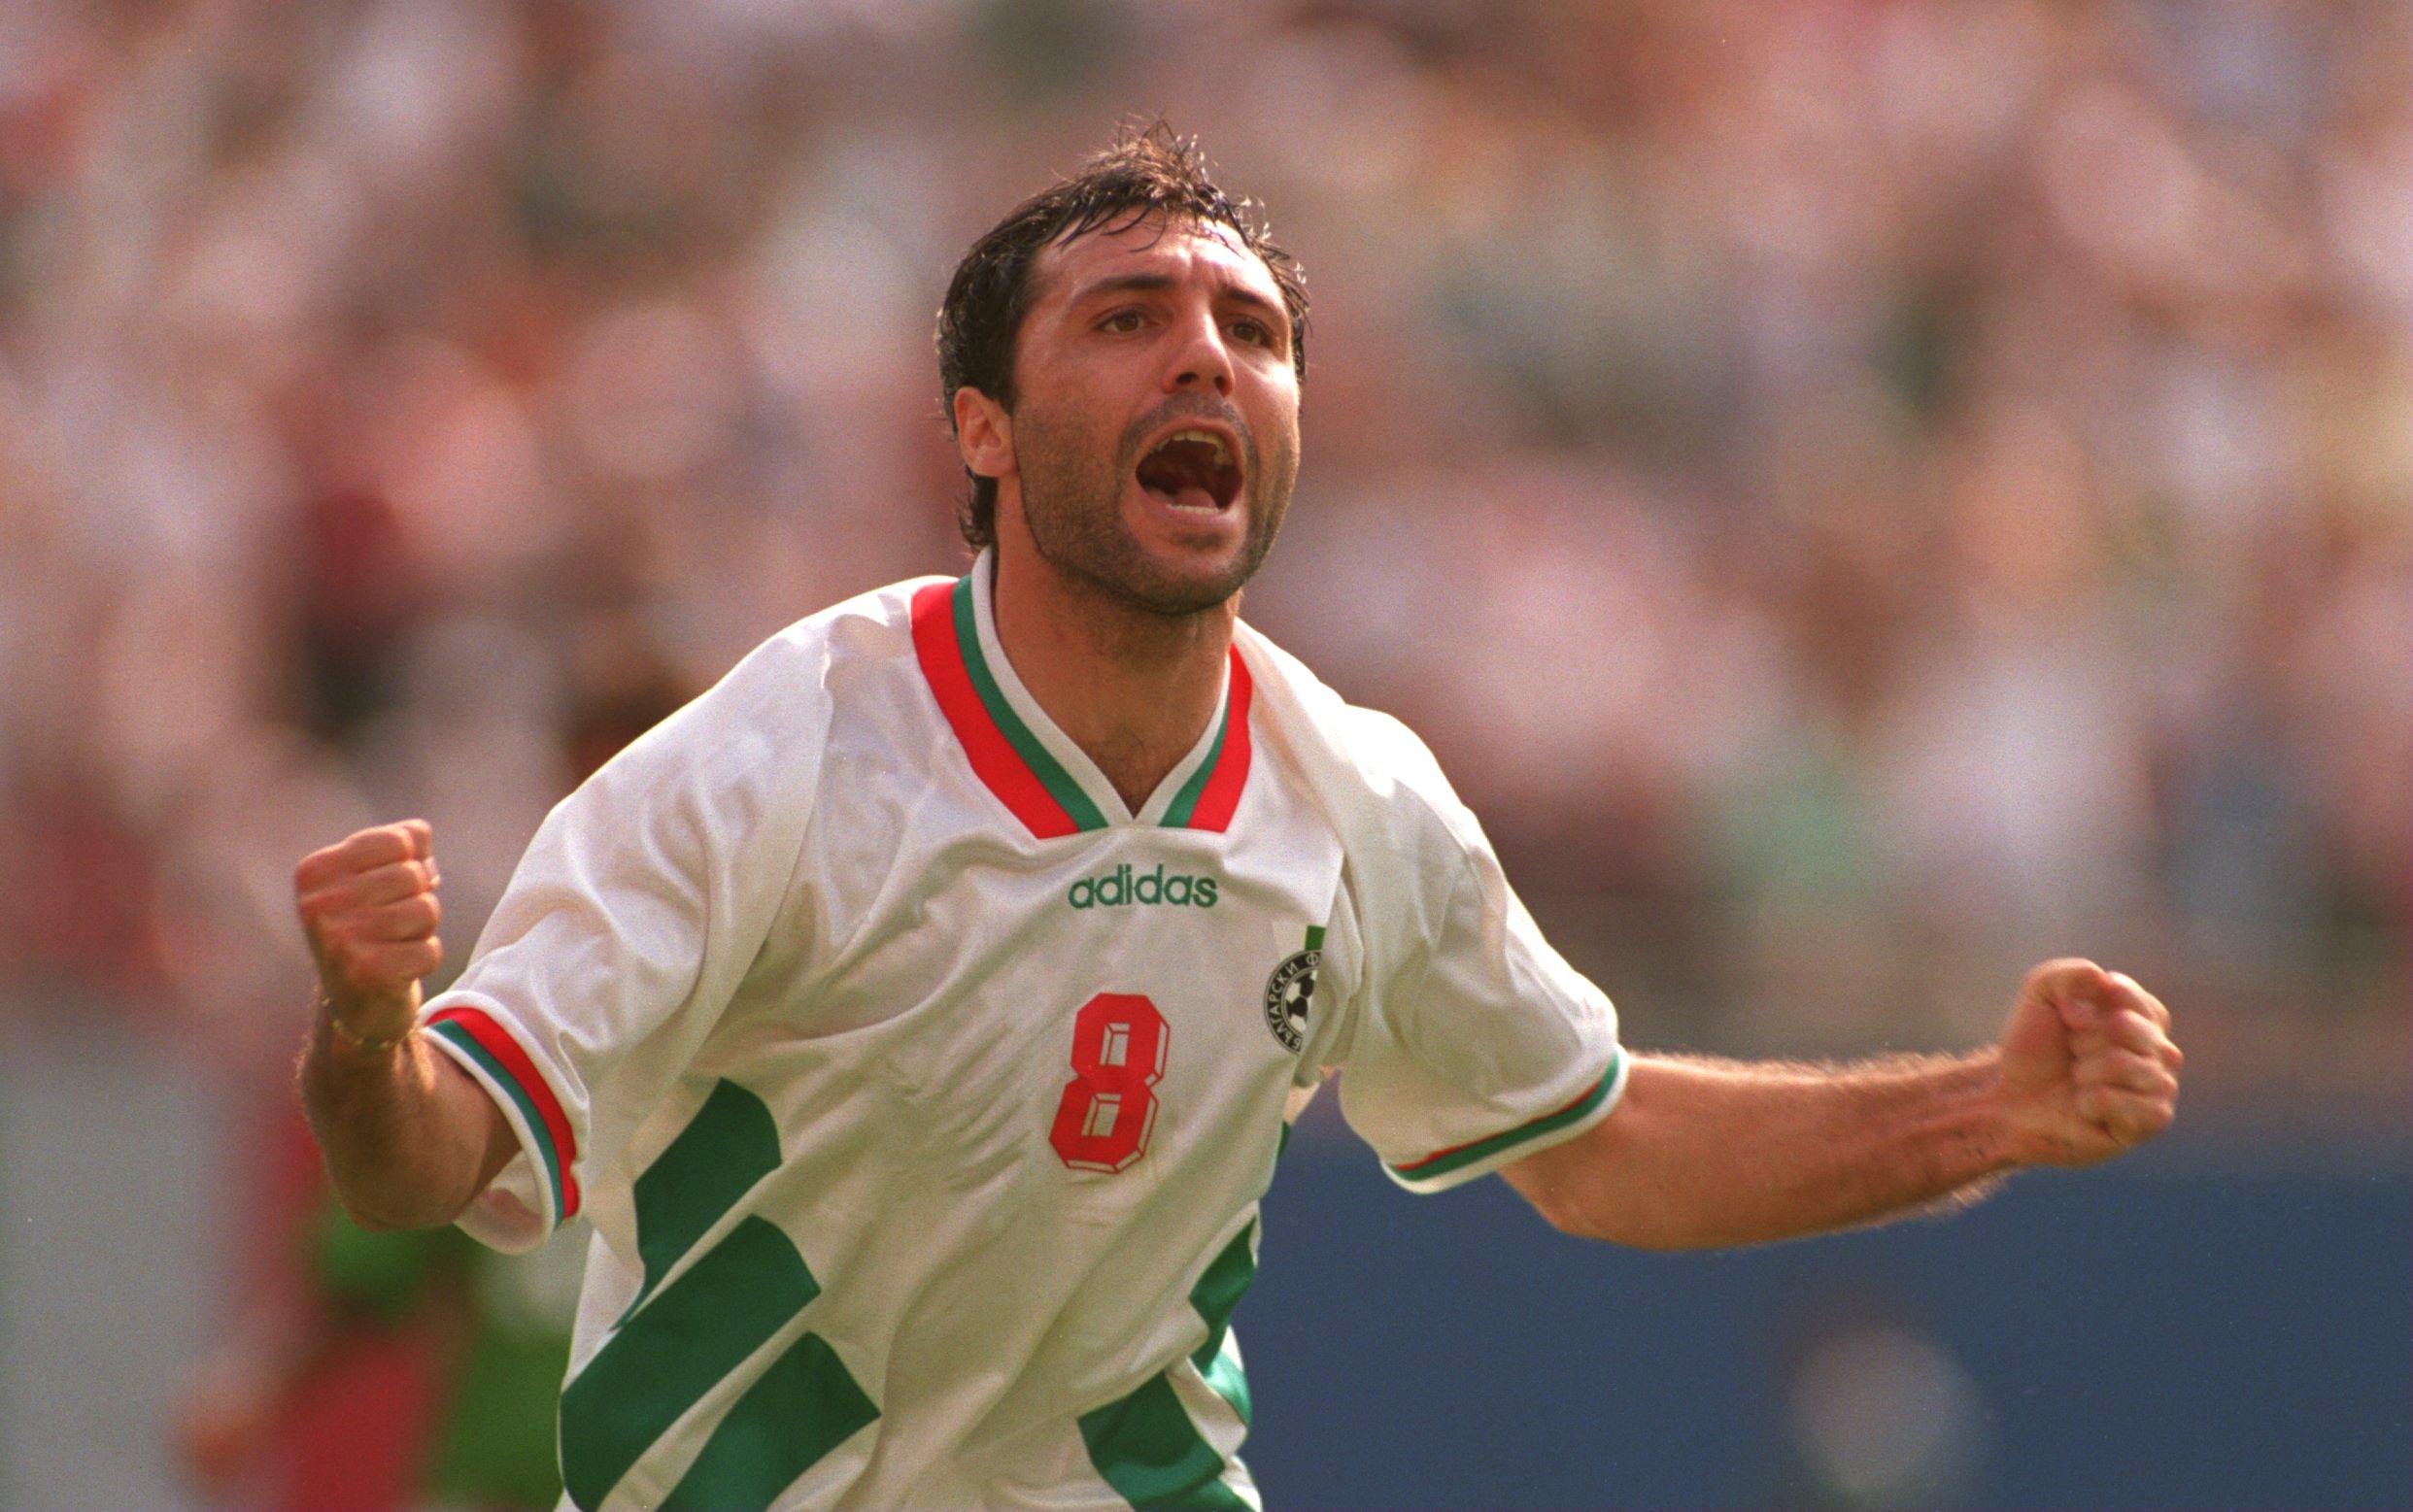 FIFA World Cup on Twitter: "1994 #WorldCup hero Hristo Stoichkov turns 50  today! WATCH: https://t.co/6sA8sYEg0H READ: https://t.co/U6AZIcS5L4  https://t.co/reVsp5y36P" / Twitter